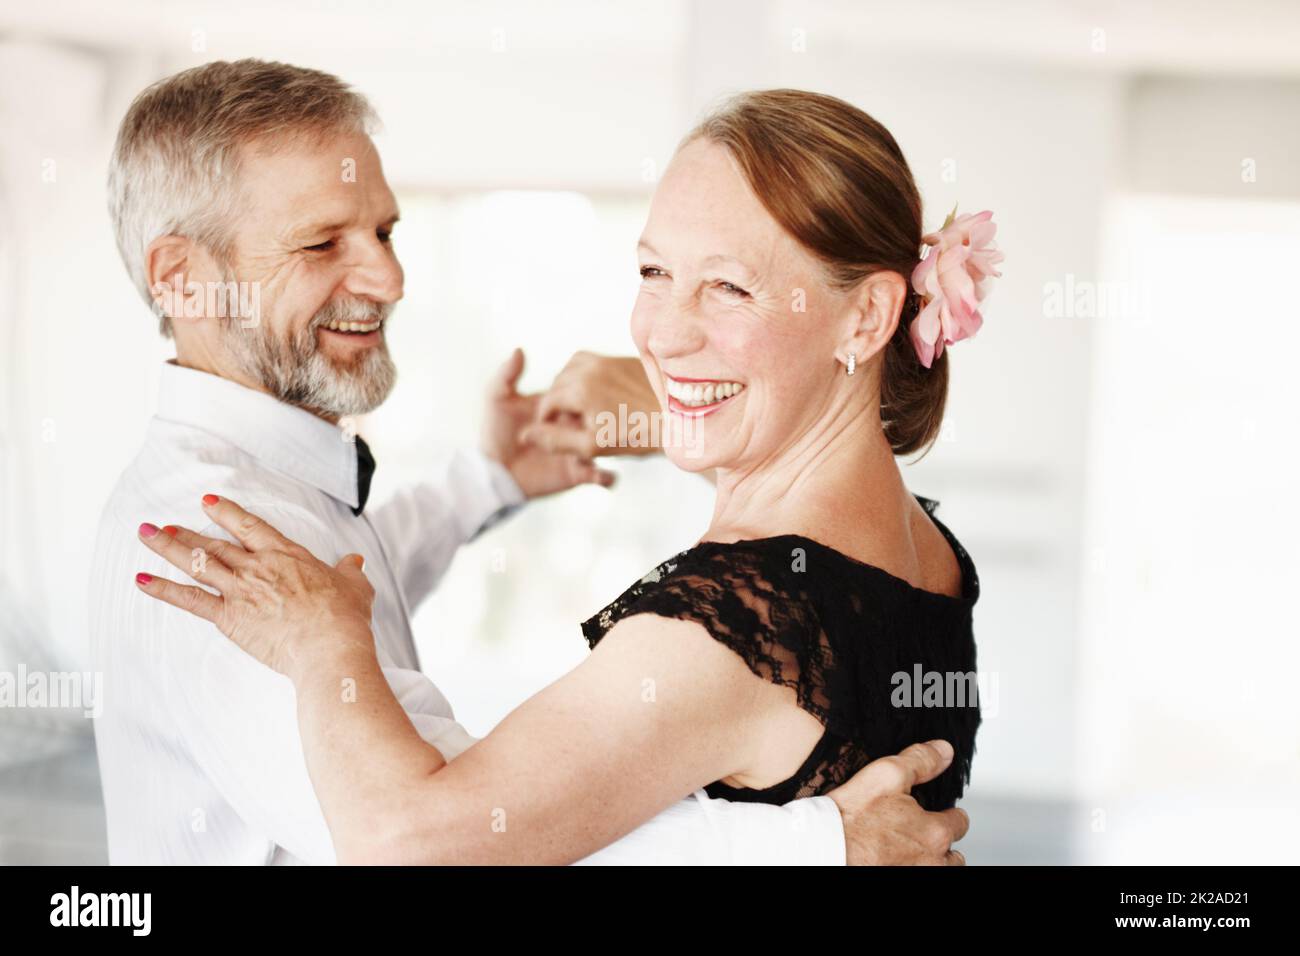 Keeping the romance alive. Shot of a mature couple dancing together in formal attire. Stock Photo